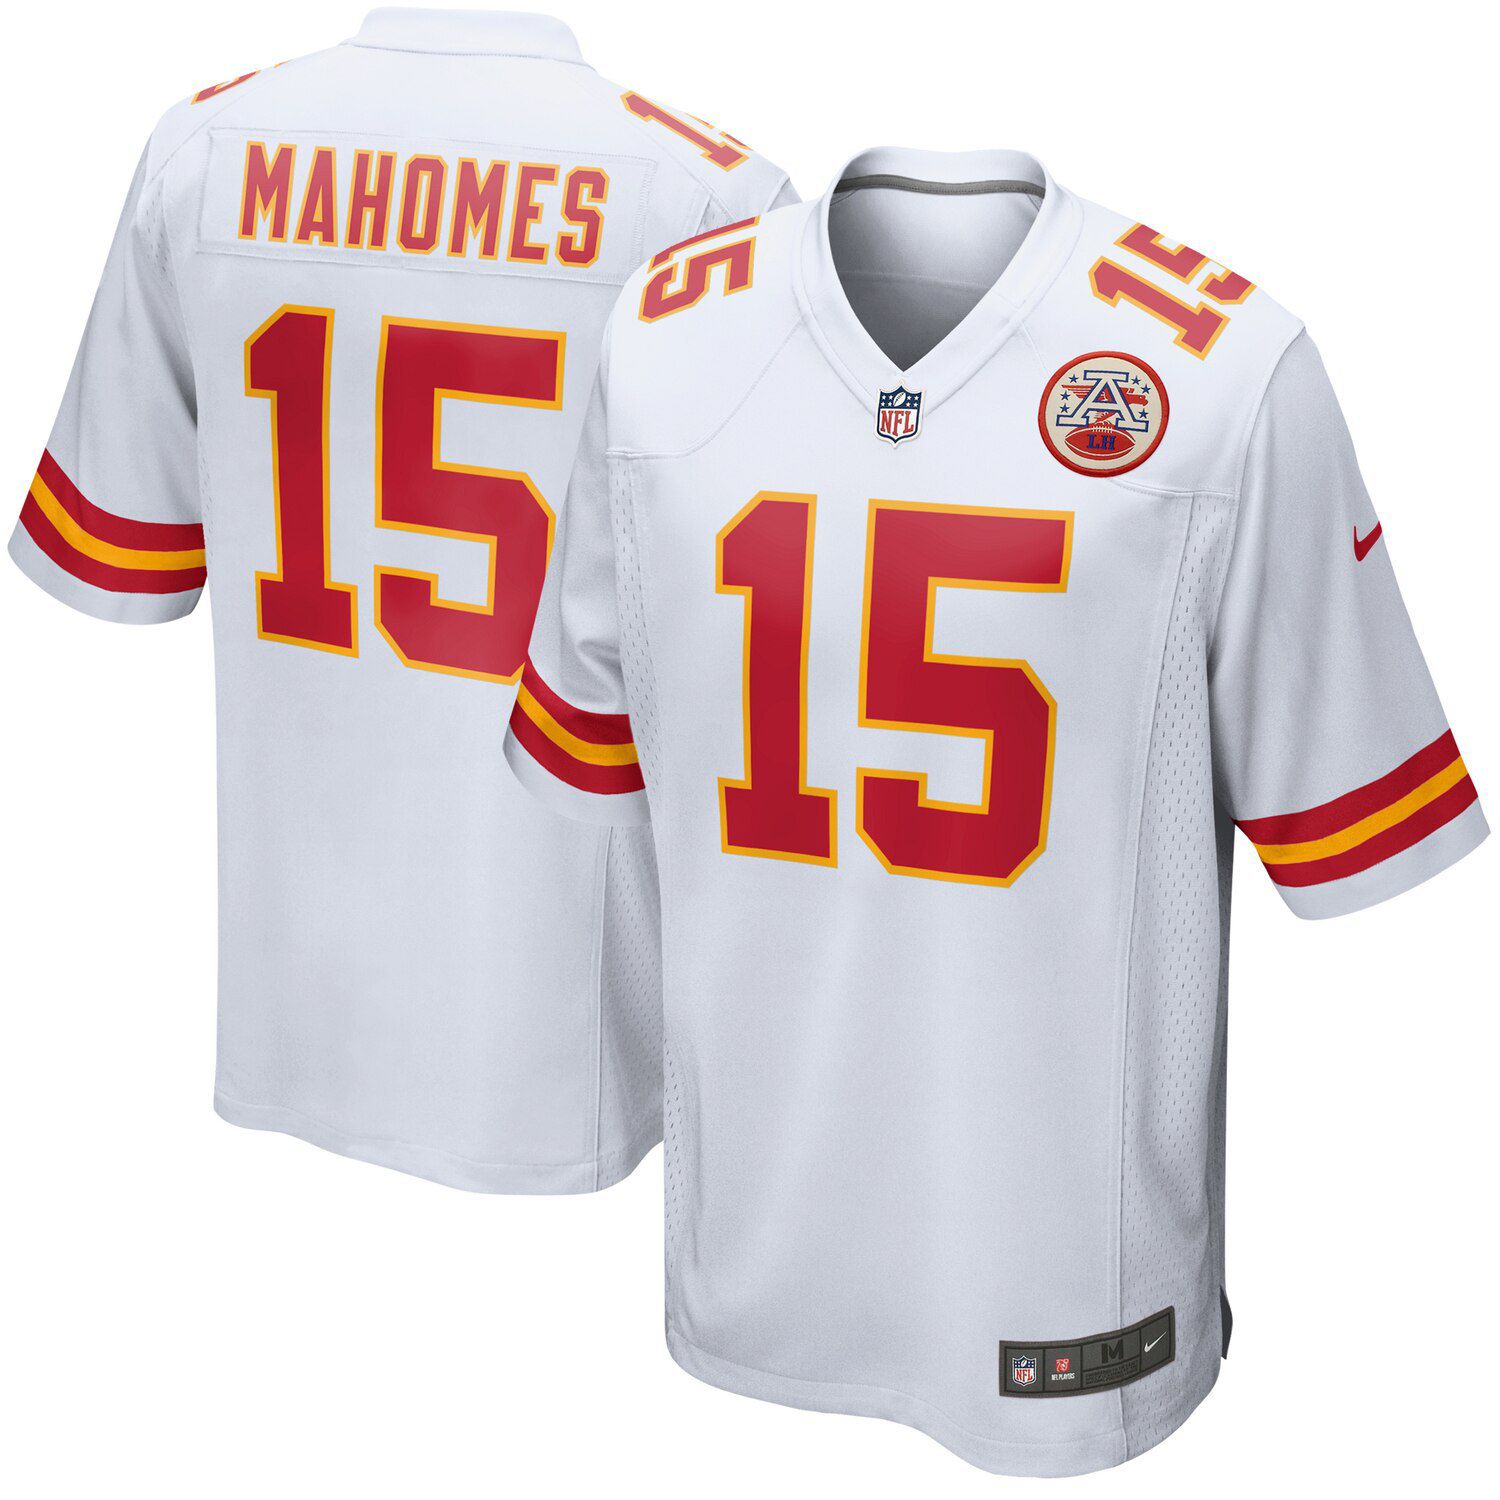 mahomes jersey for sale